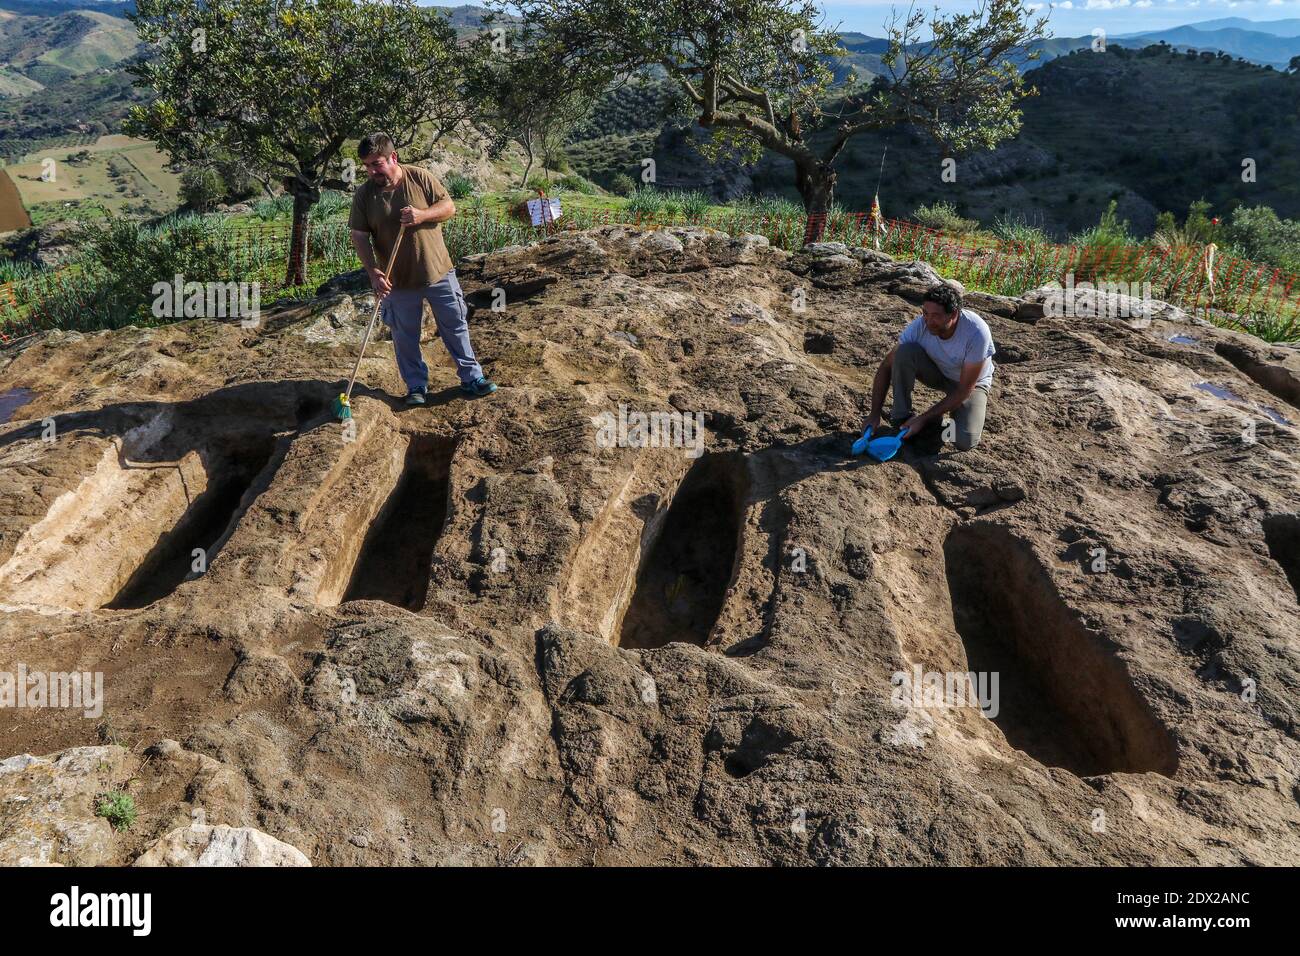 December 23, 2020: 23 December 2020 (Pizarra, Malaga) The team of archaeologists led by the doctor in Medieval History of the University of Malaga Virgilio MartÃ-nez Enamorado has been carrying out an excavation in Castillejos de Quintana in Pizarra for two months.The site could be an old Visigoth monastery city and Muslim whose life lasted between the 6th and 10th centuries and which could explain the transition from the Ancient to the Middle Ages - Two interventions are being made that will last several years due to their complexity, on the one hand in the Castillejos of Quintana and on the Stock Photo